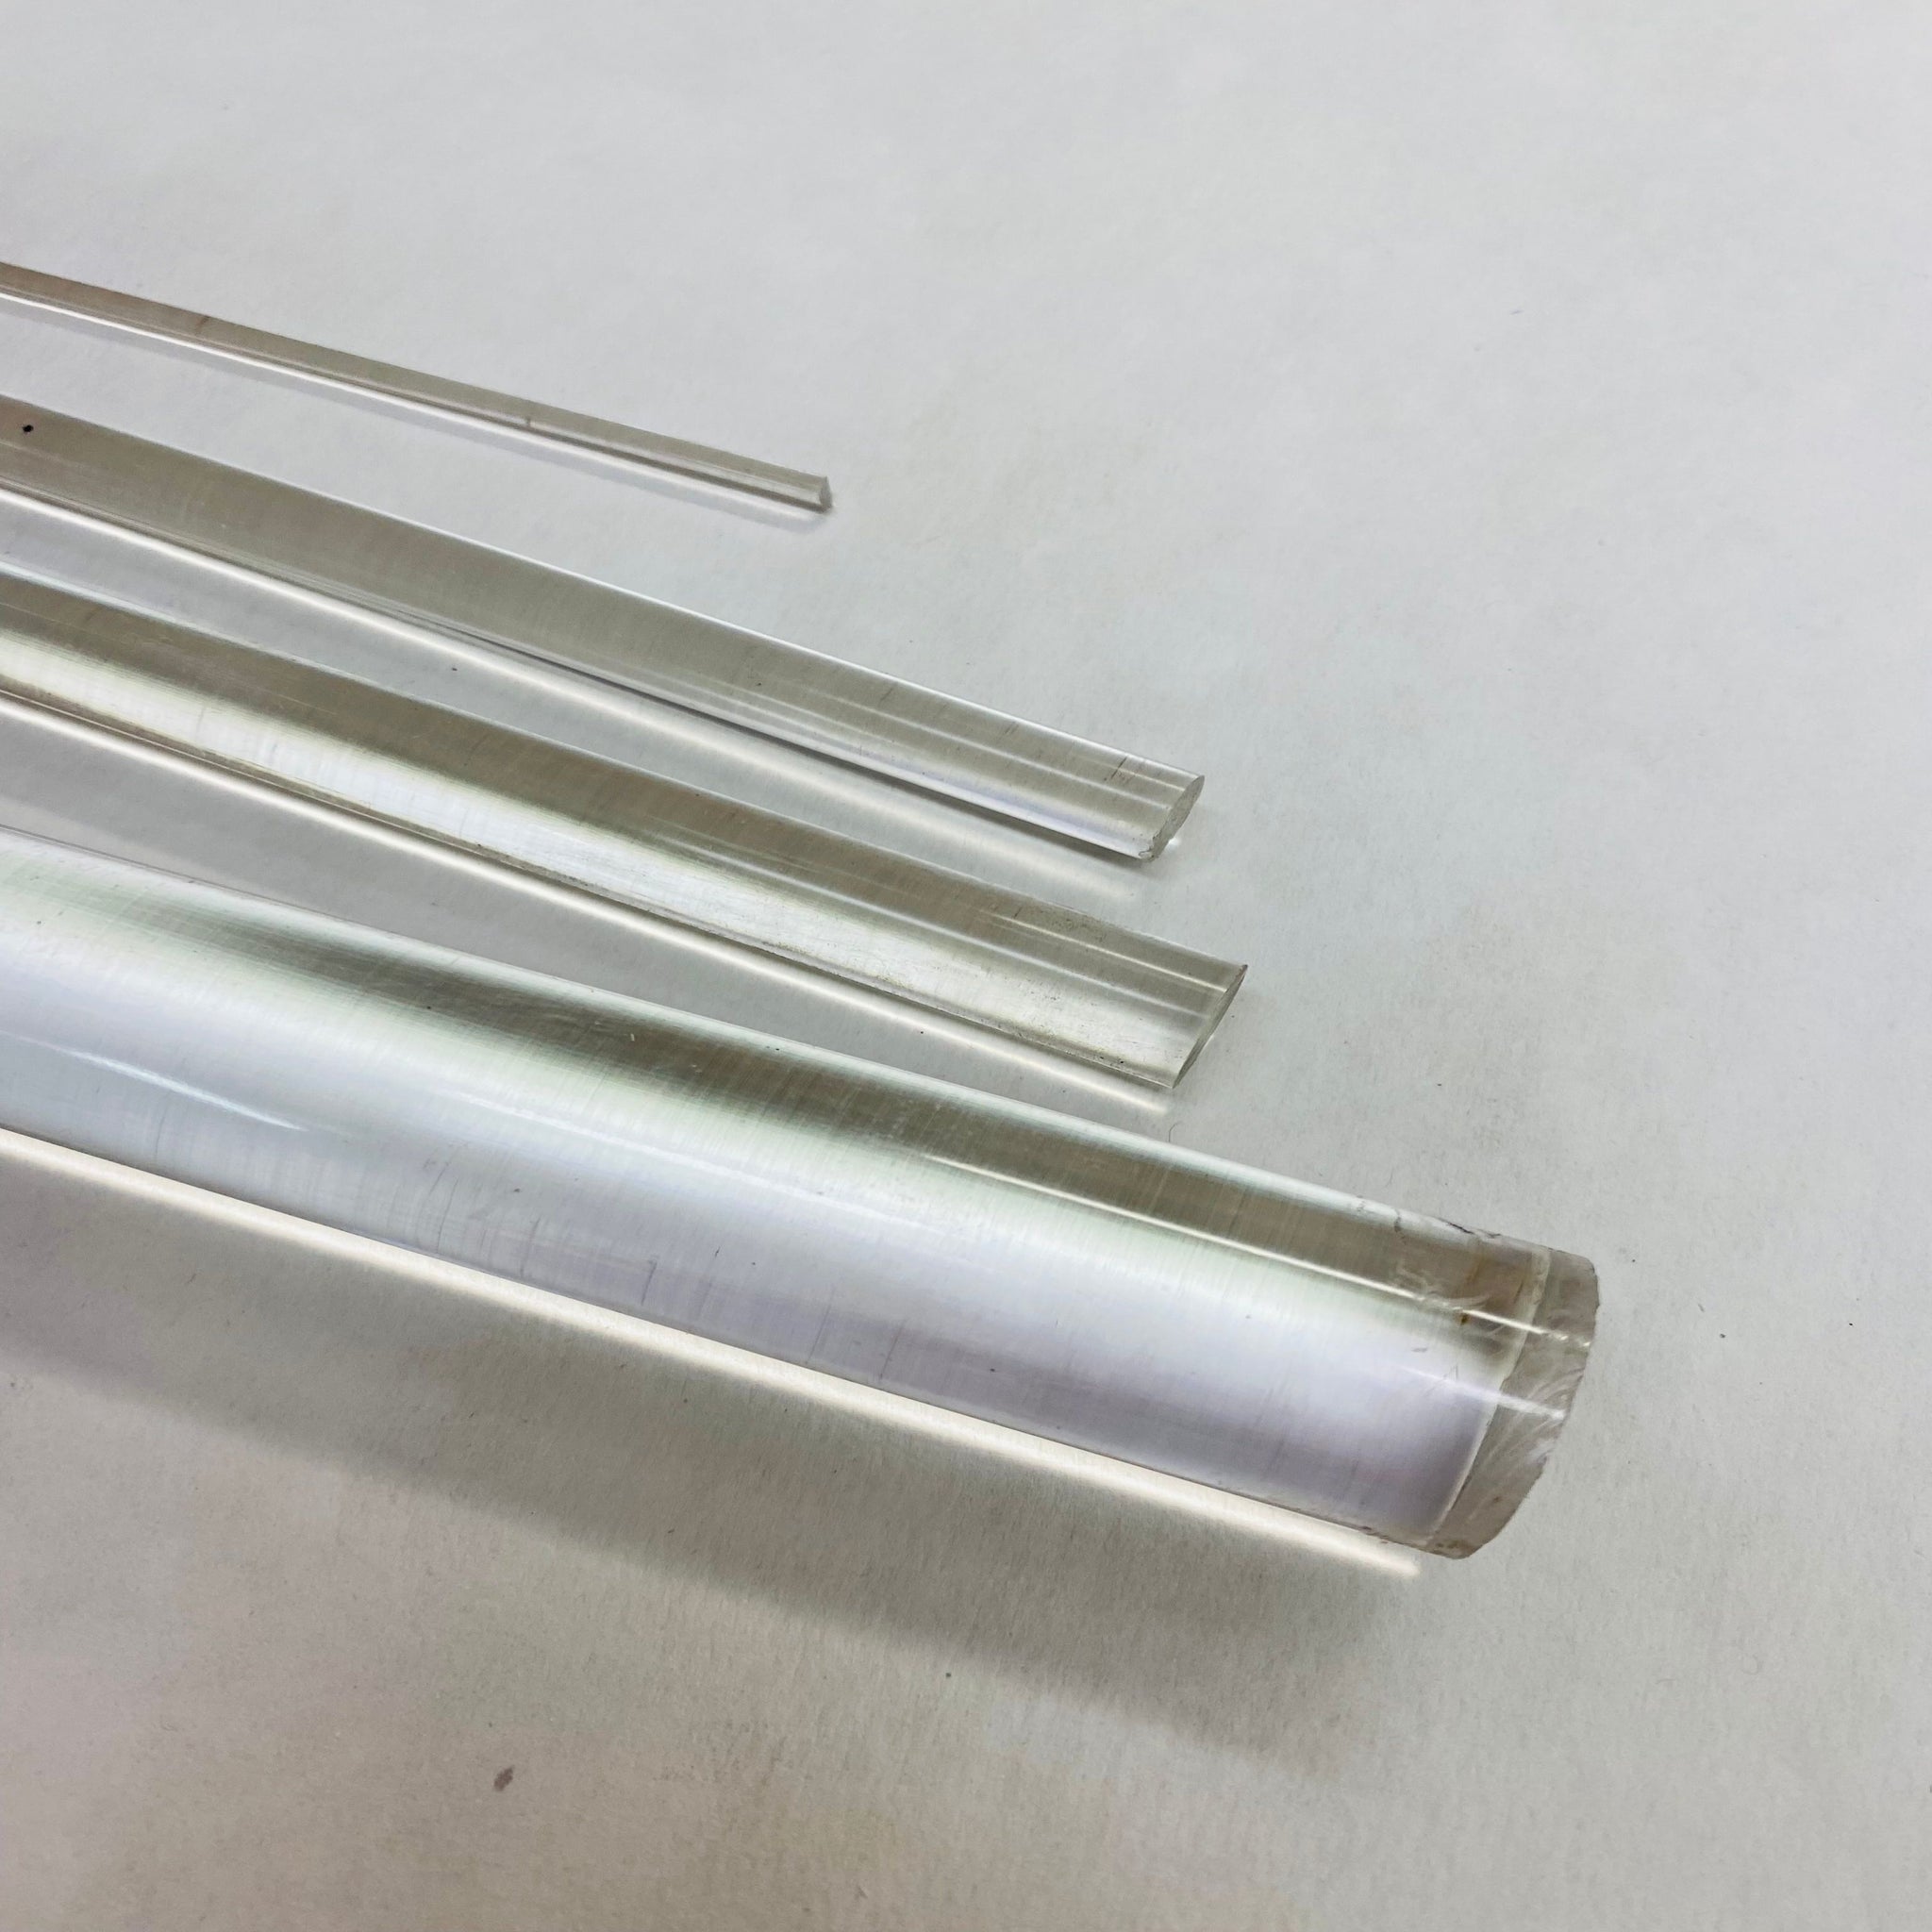 Large Selection of Cut-to-Size Plexiglass Rod In Stock at